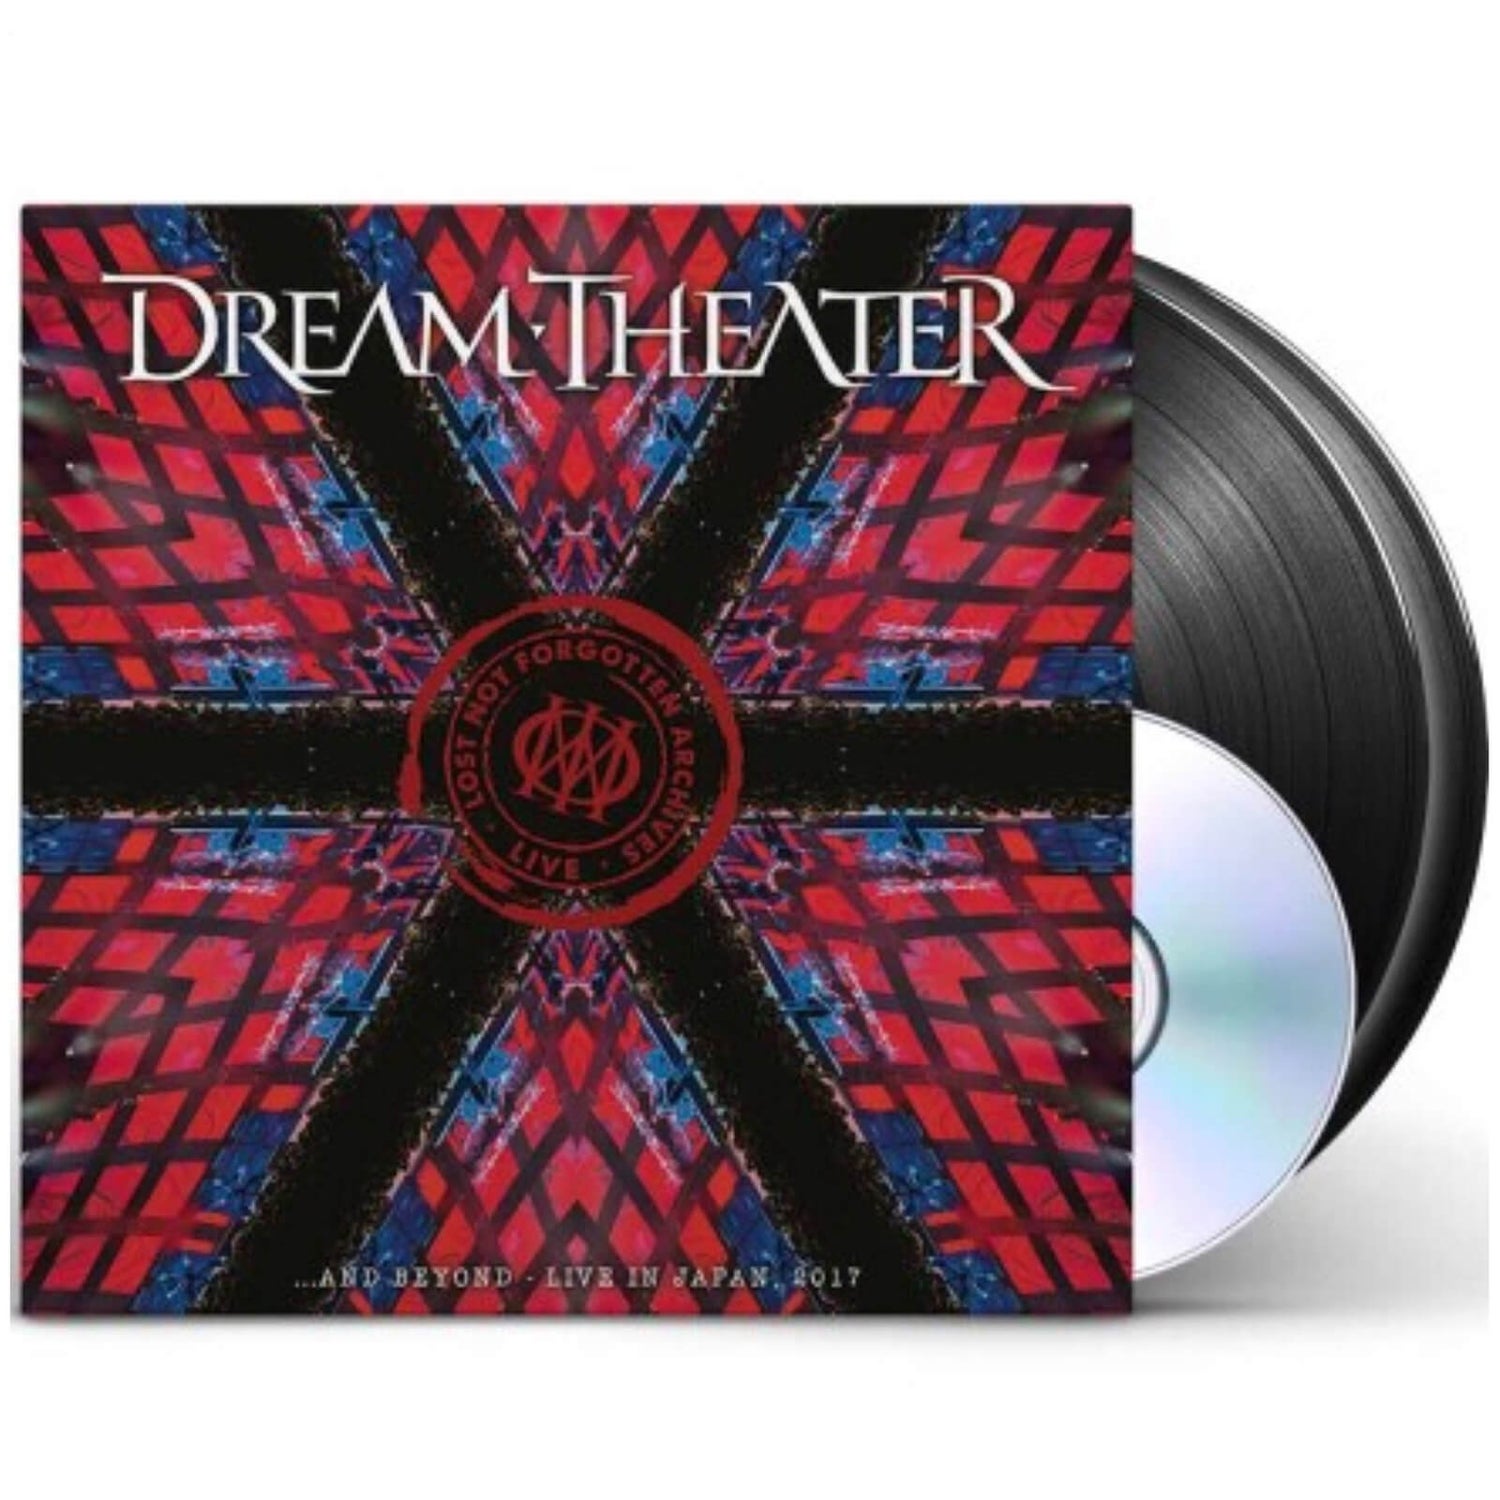 Dream Theater - Lost Not Forgotten Archives: ...and Beyond Live In Japan 2017 Vinyl (Includes CD)